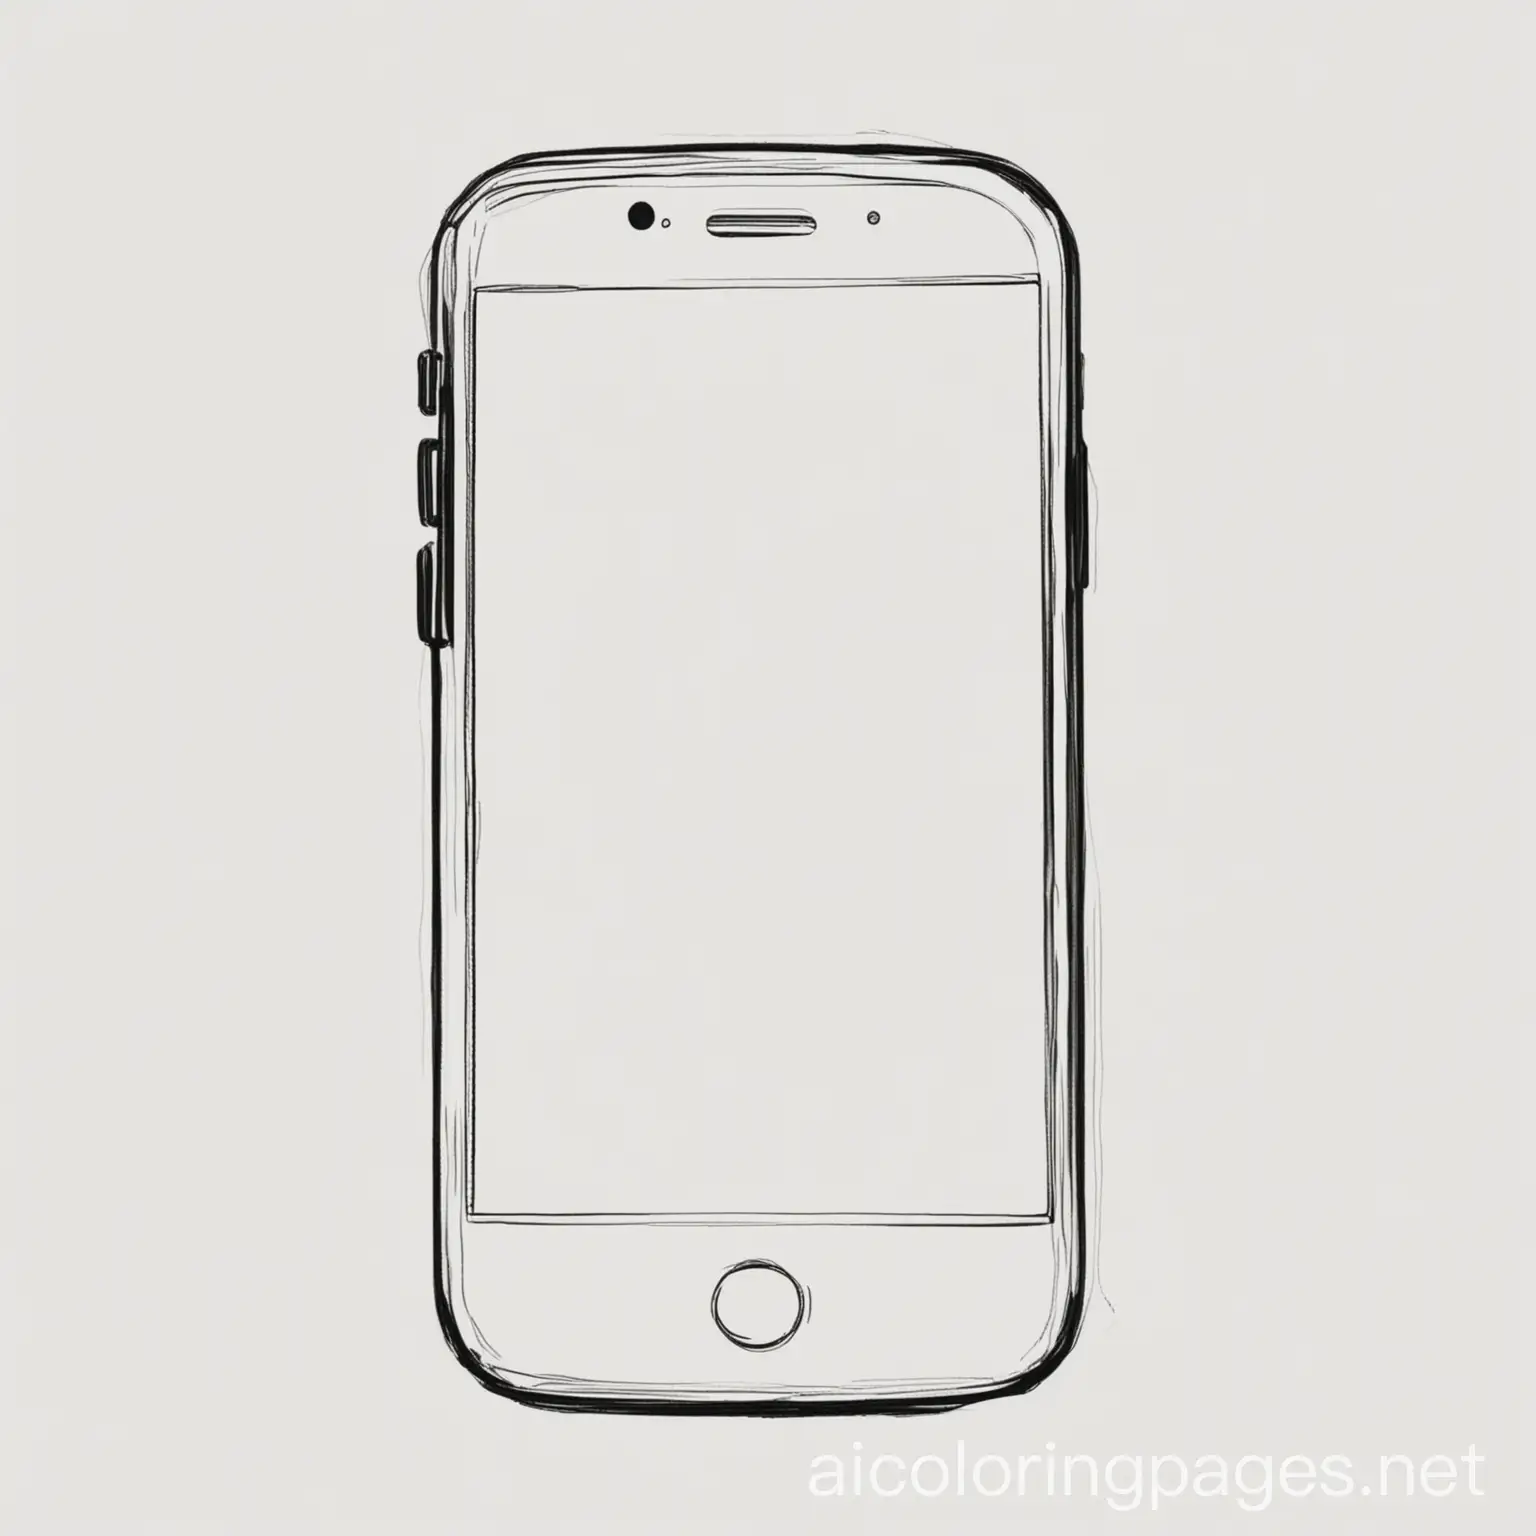 Simple-Black-and-White-Cell-Phone-Coloring-Page-on-White-Background